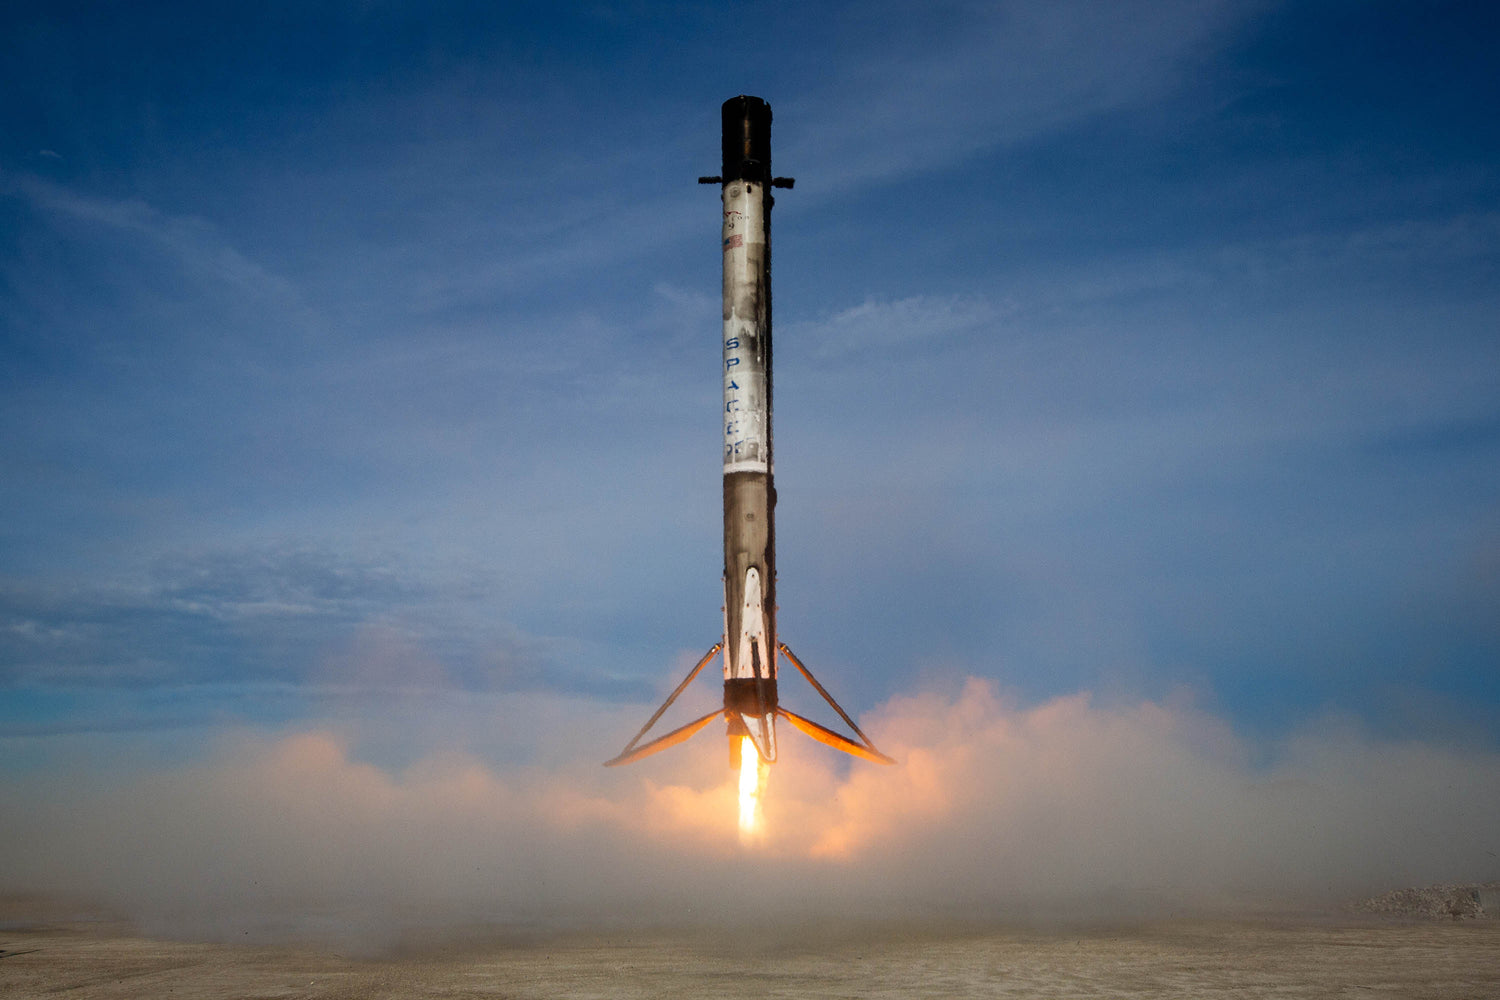 SpaceX is scheduled to deploy Starlink satellites on Sunday and will attempt a 50th Falcon 9 rocket landing! [Update: Rescheduled to Monday]